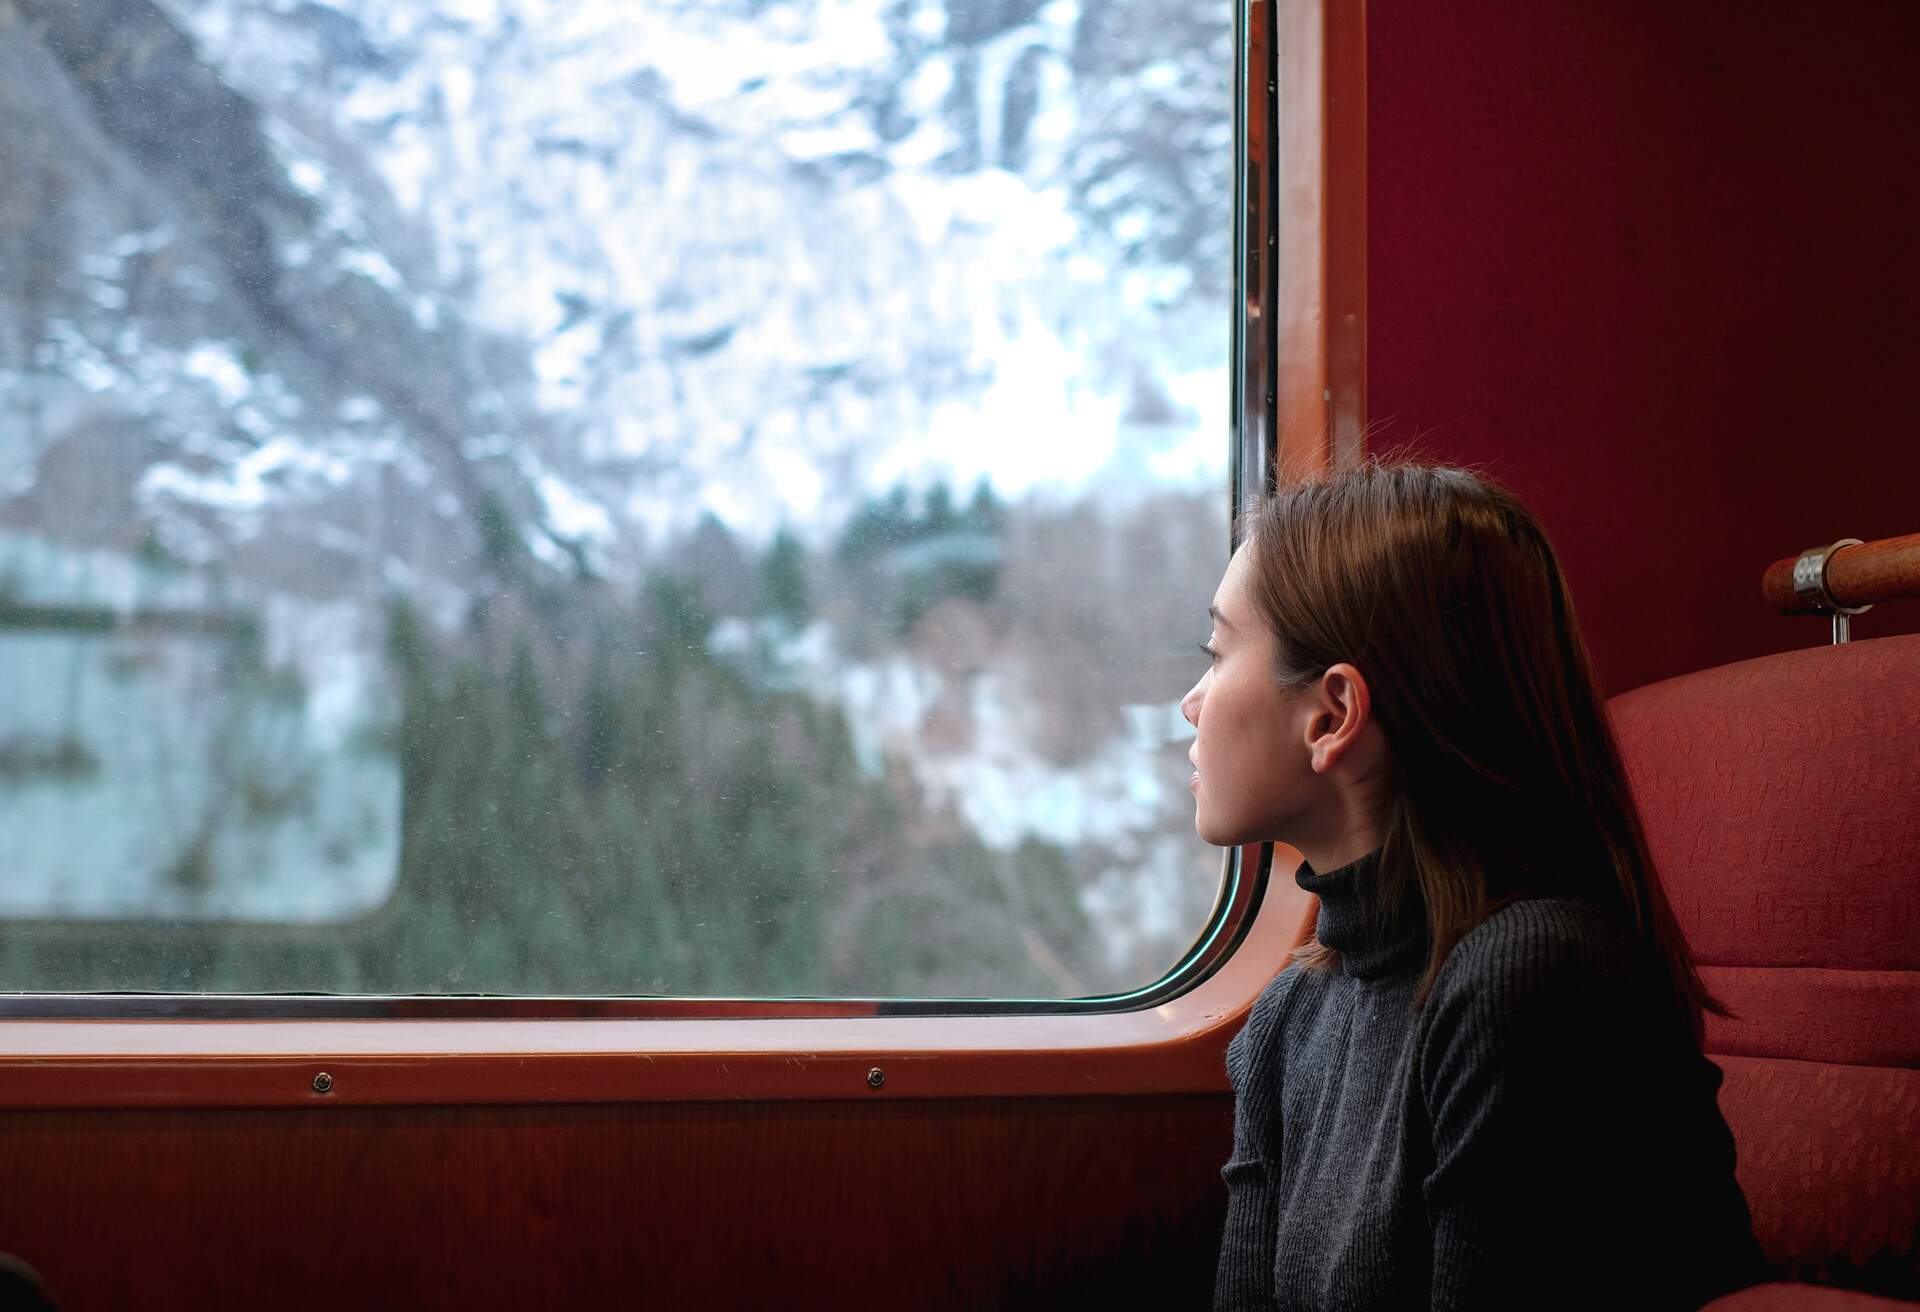 DEST_NORWAY_THEME_TRAIN_TRAVEL_PEOPLE_GIRL_GettyImages-1215153966